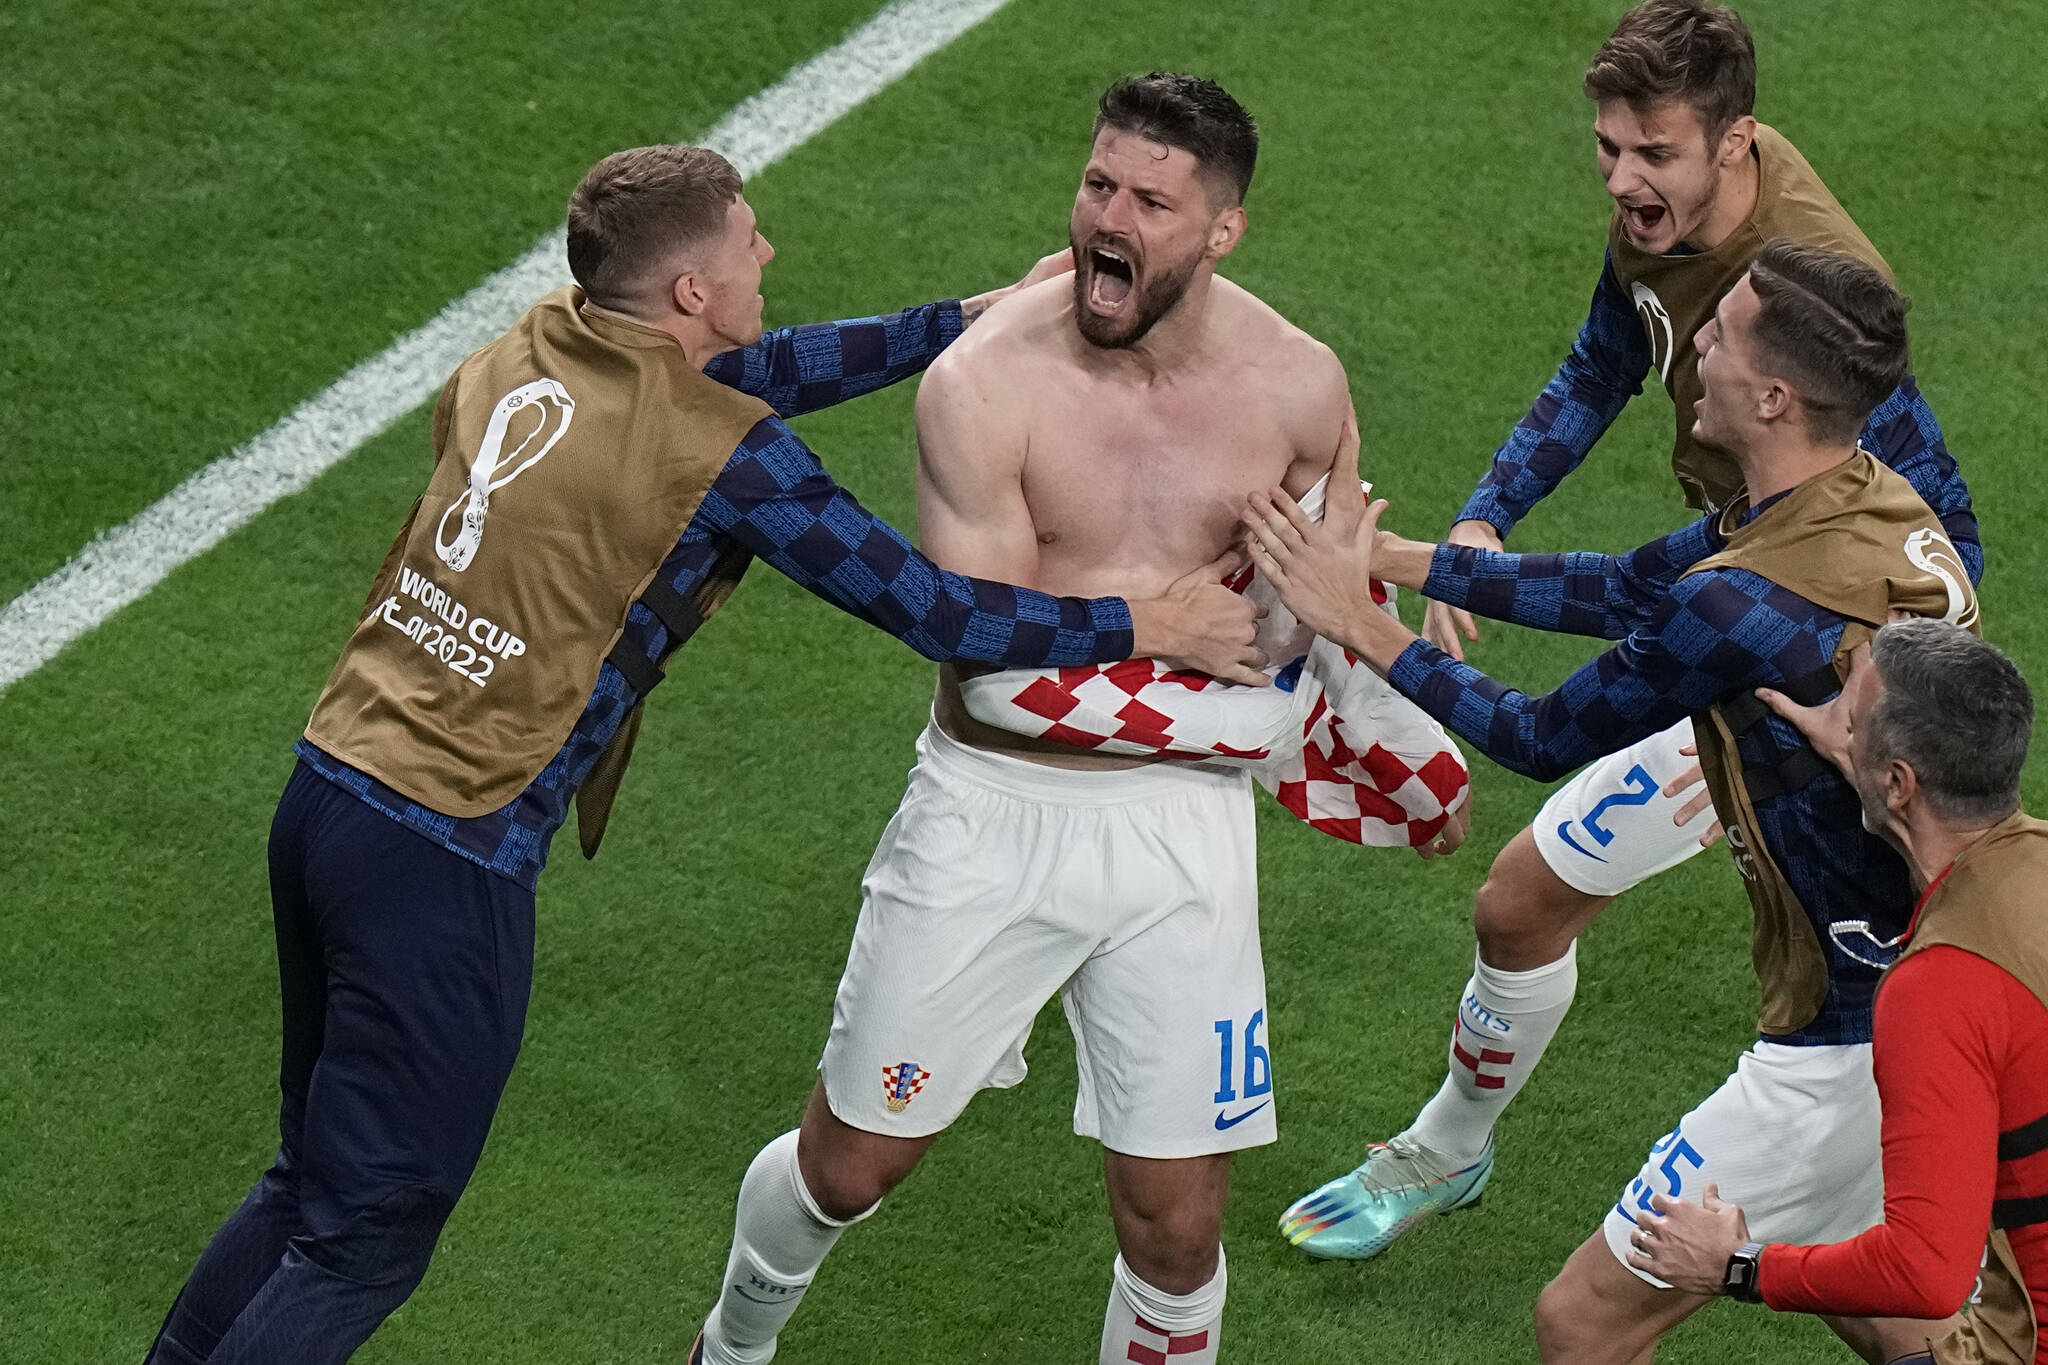 Croatia’s Bruno Petkovic, center, celebrates after scoring his side’s opening goal during the World Cup quarterfinal soccer match between Croatia and Brazil, at the Education City Stadium in Al Rayyan, Qatar, Friday, Dec. 9, 2022. (AP Photo/Pavel Golovkin)